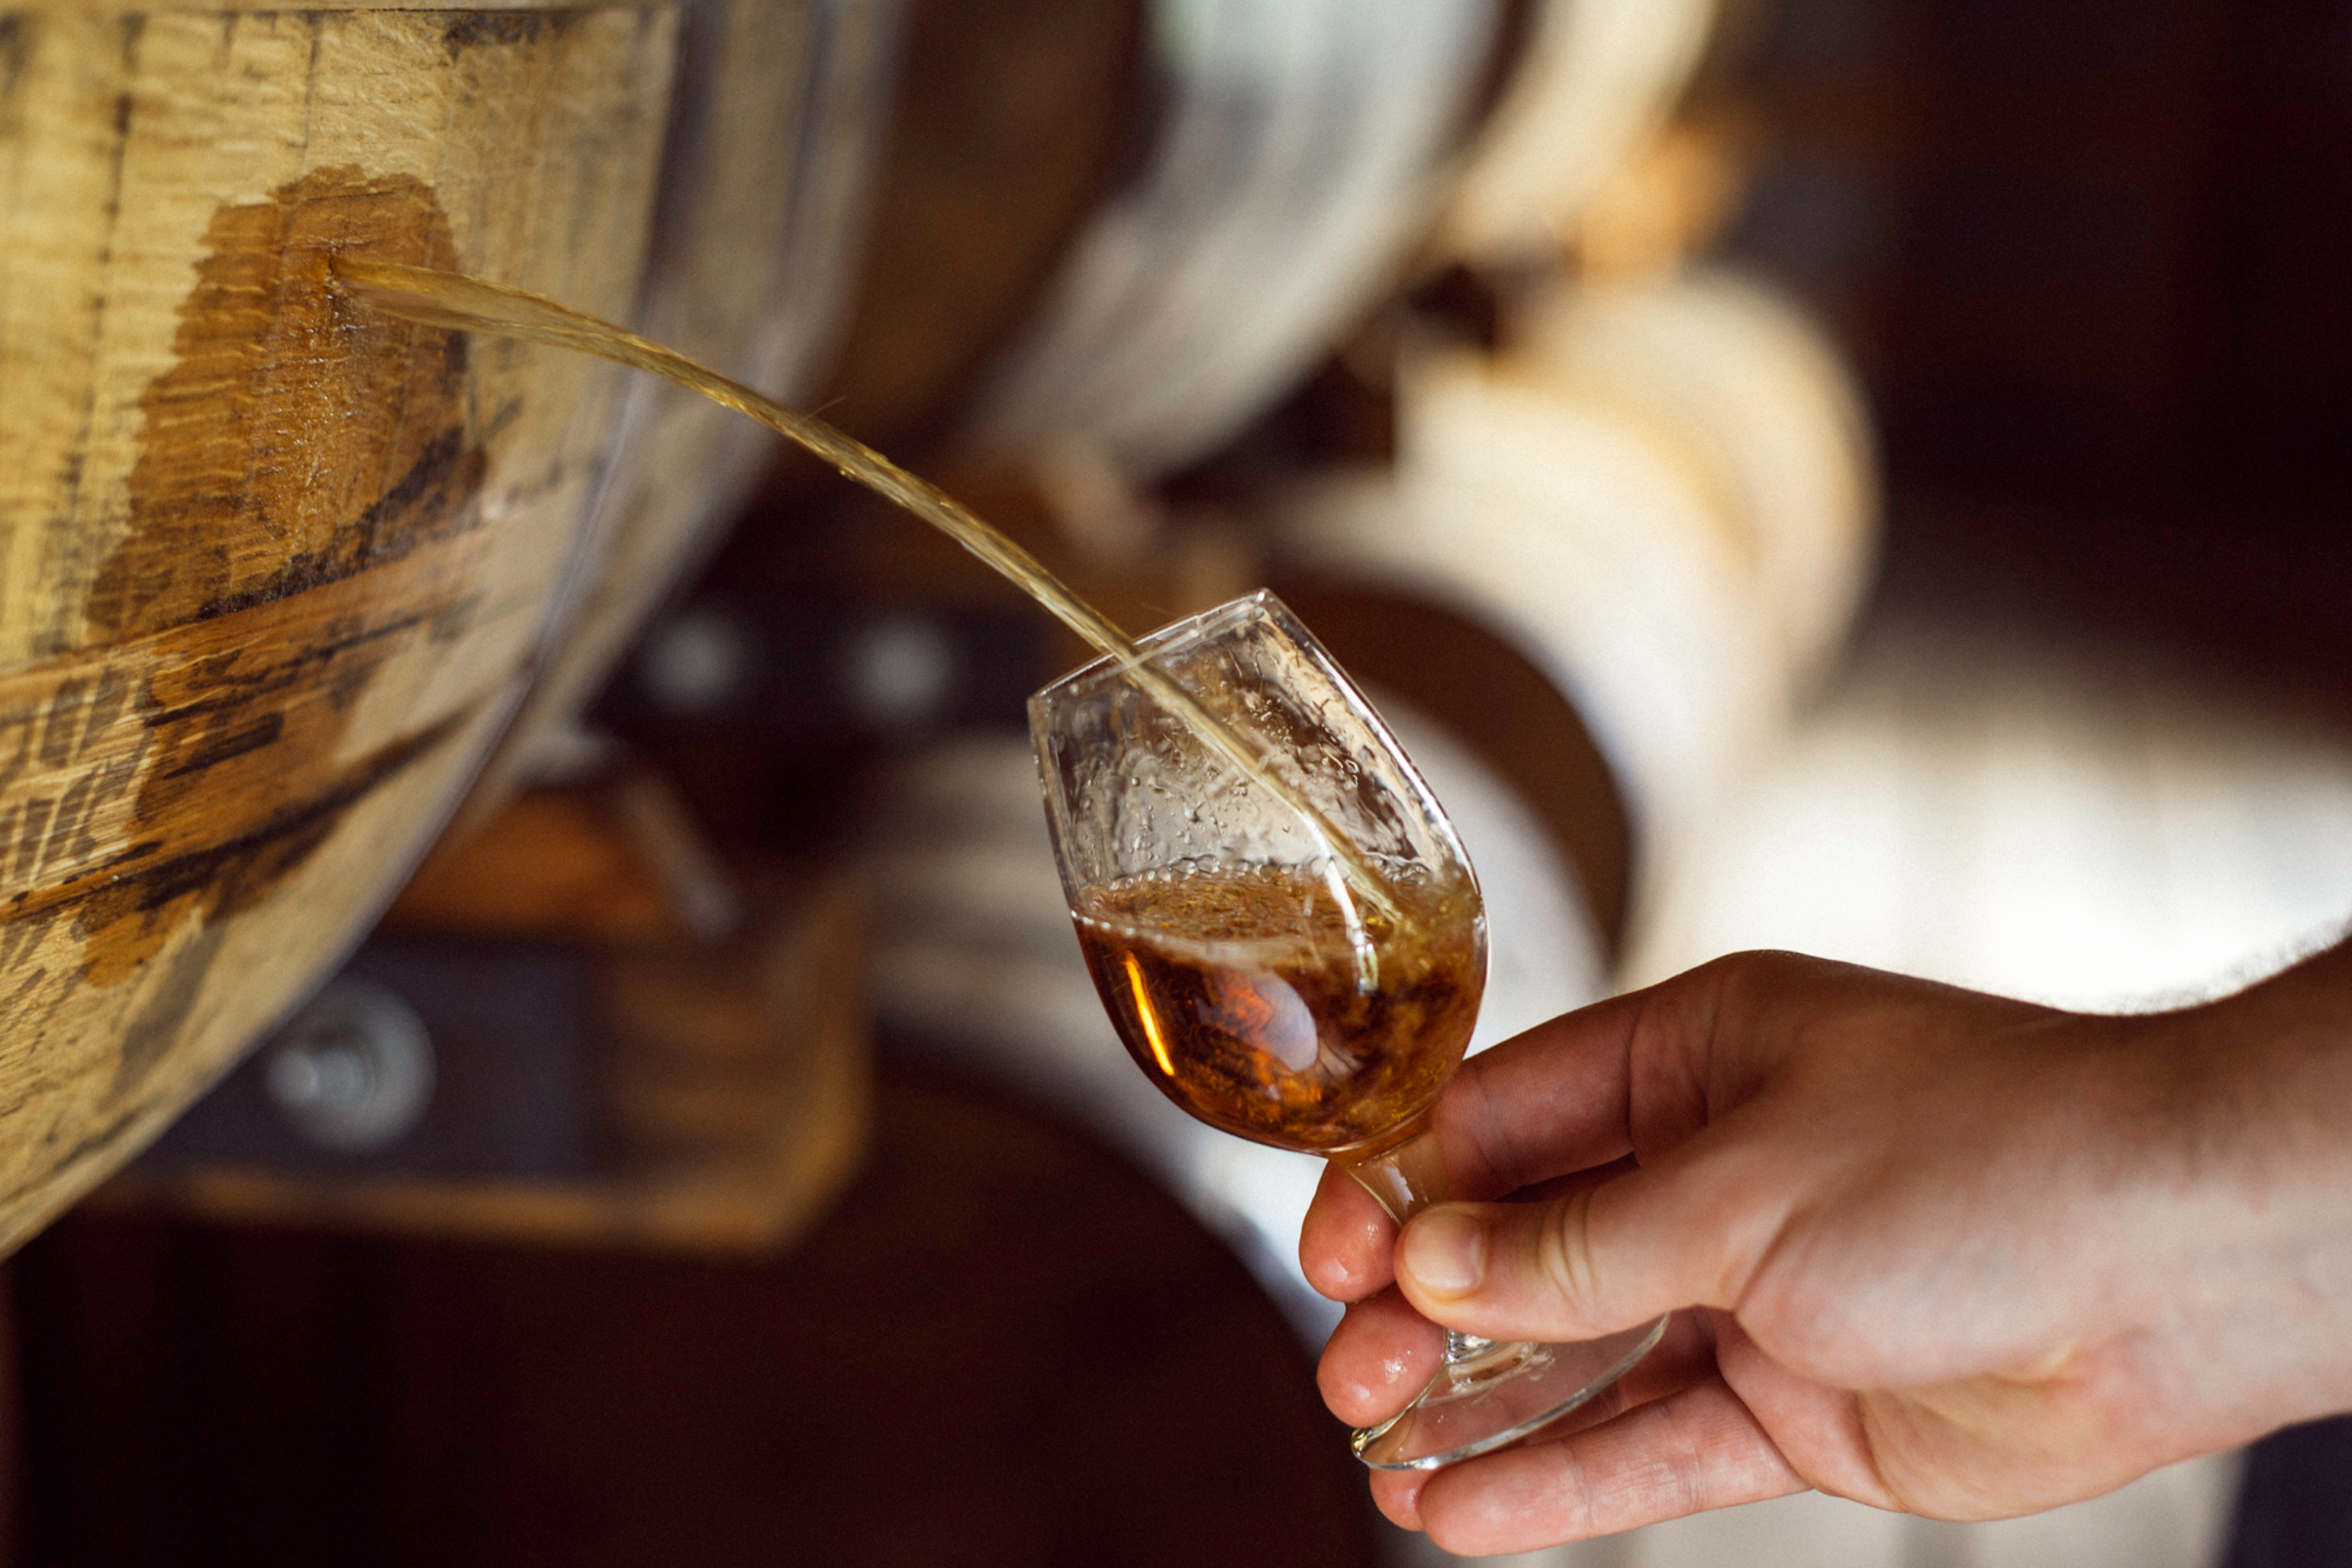 Whiskey being poured from a barrel into a glass.